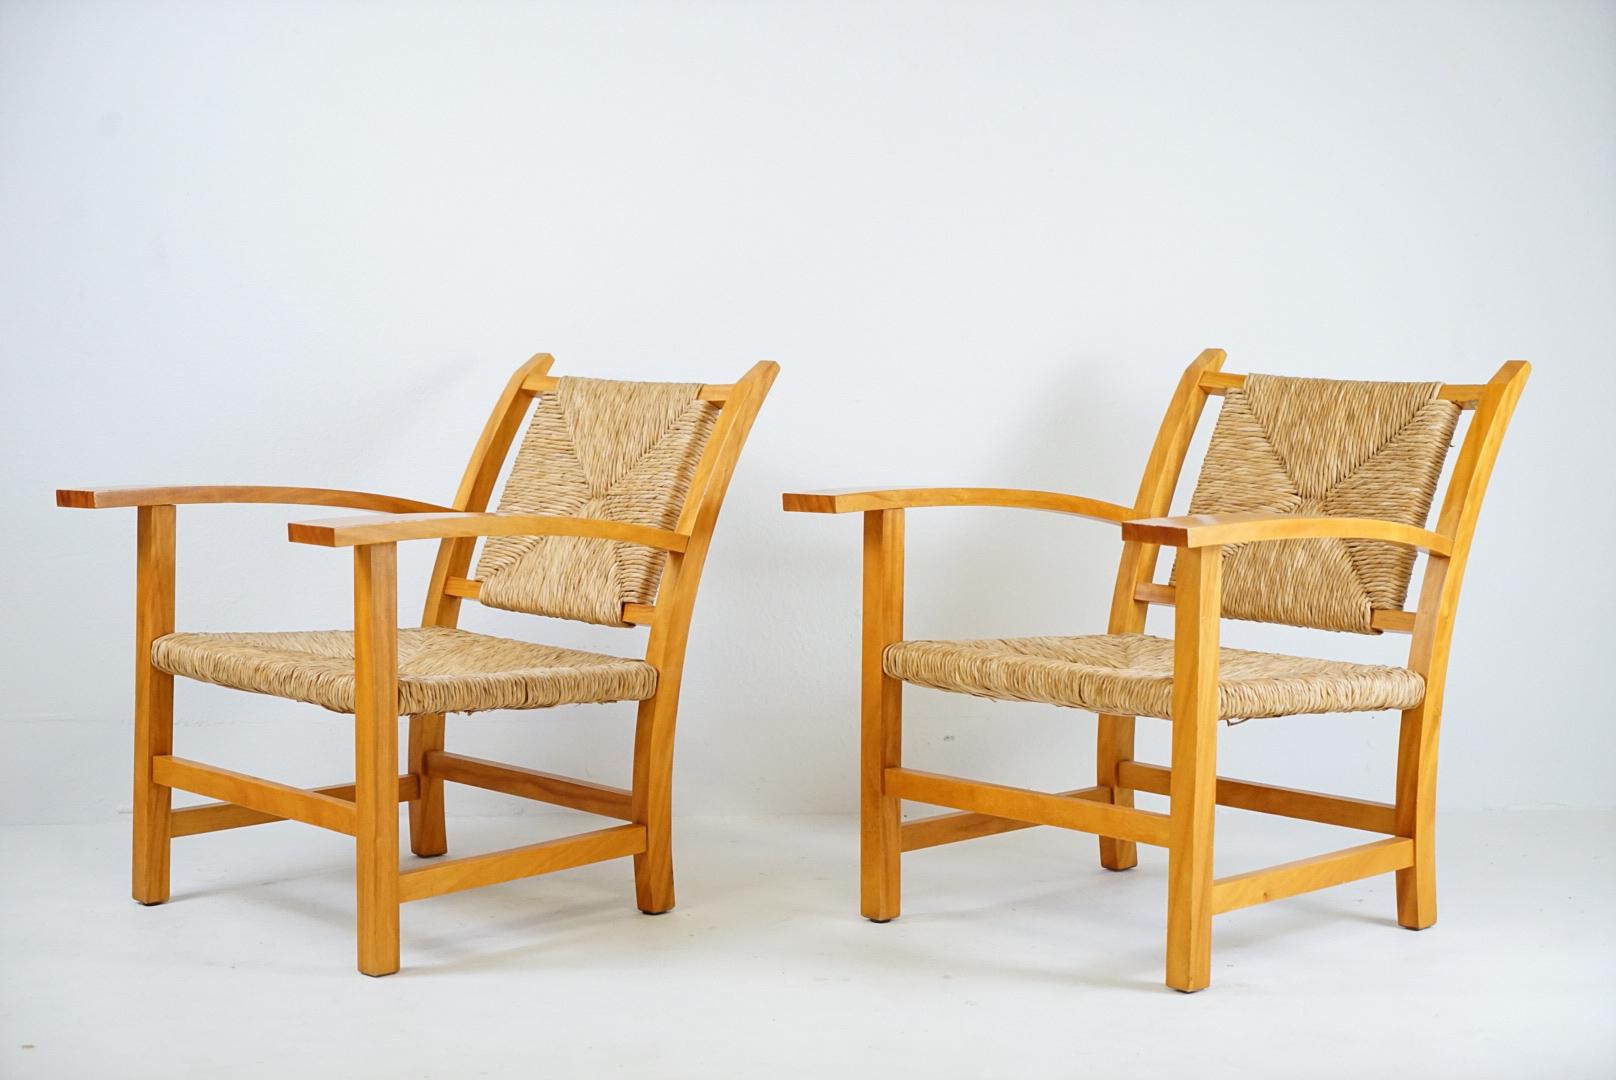 Hand-Crafted Francis Jourdain Attributed Pair of Lounge Chairs